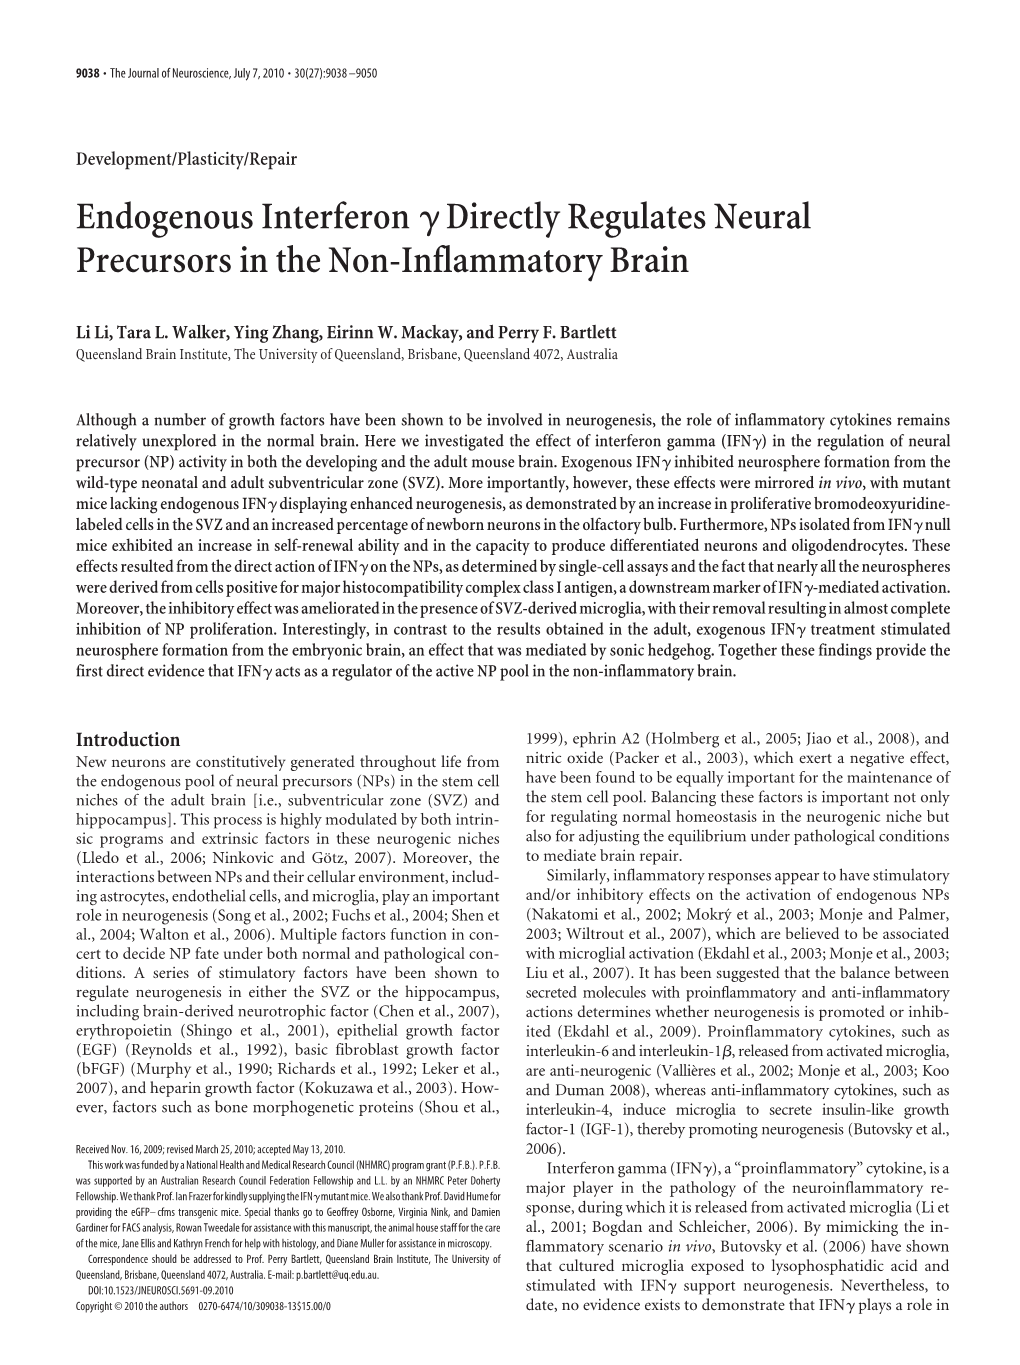 Endogenous Interferon Directly Regulates Neural Precursors in The